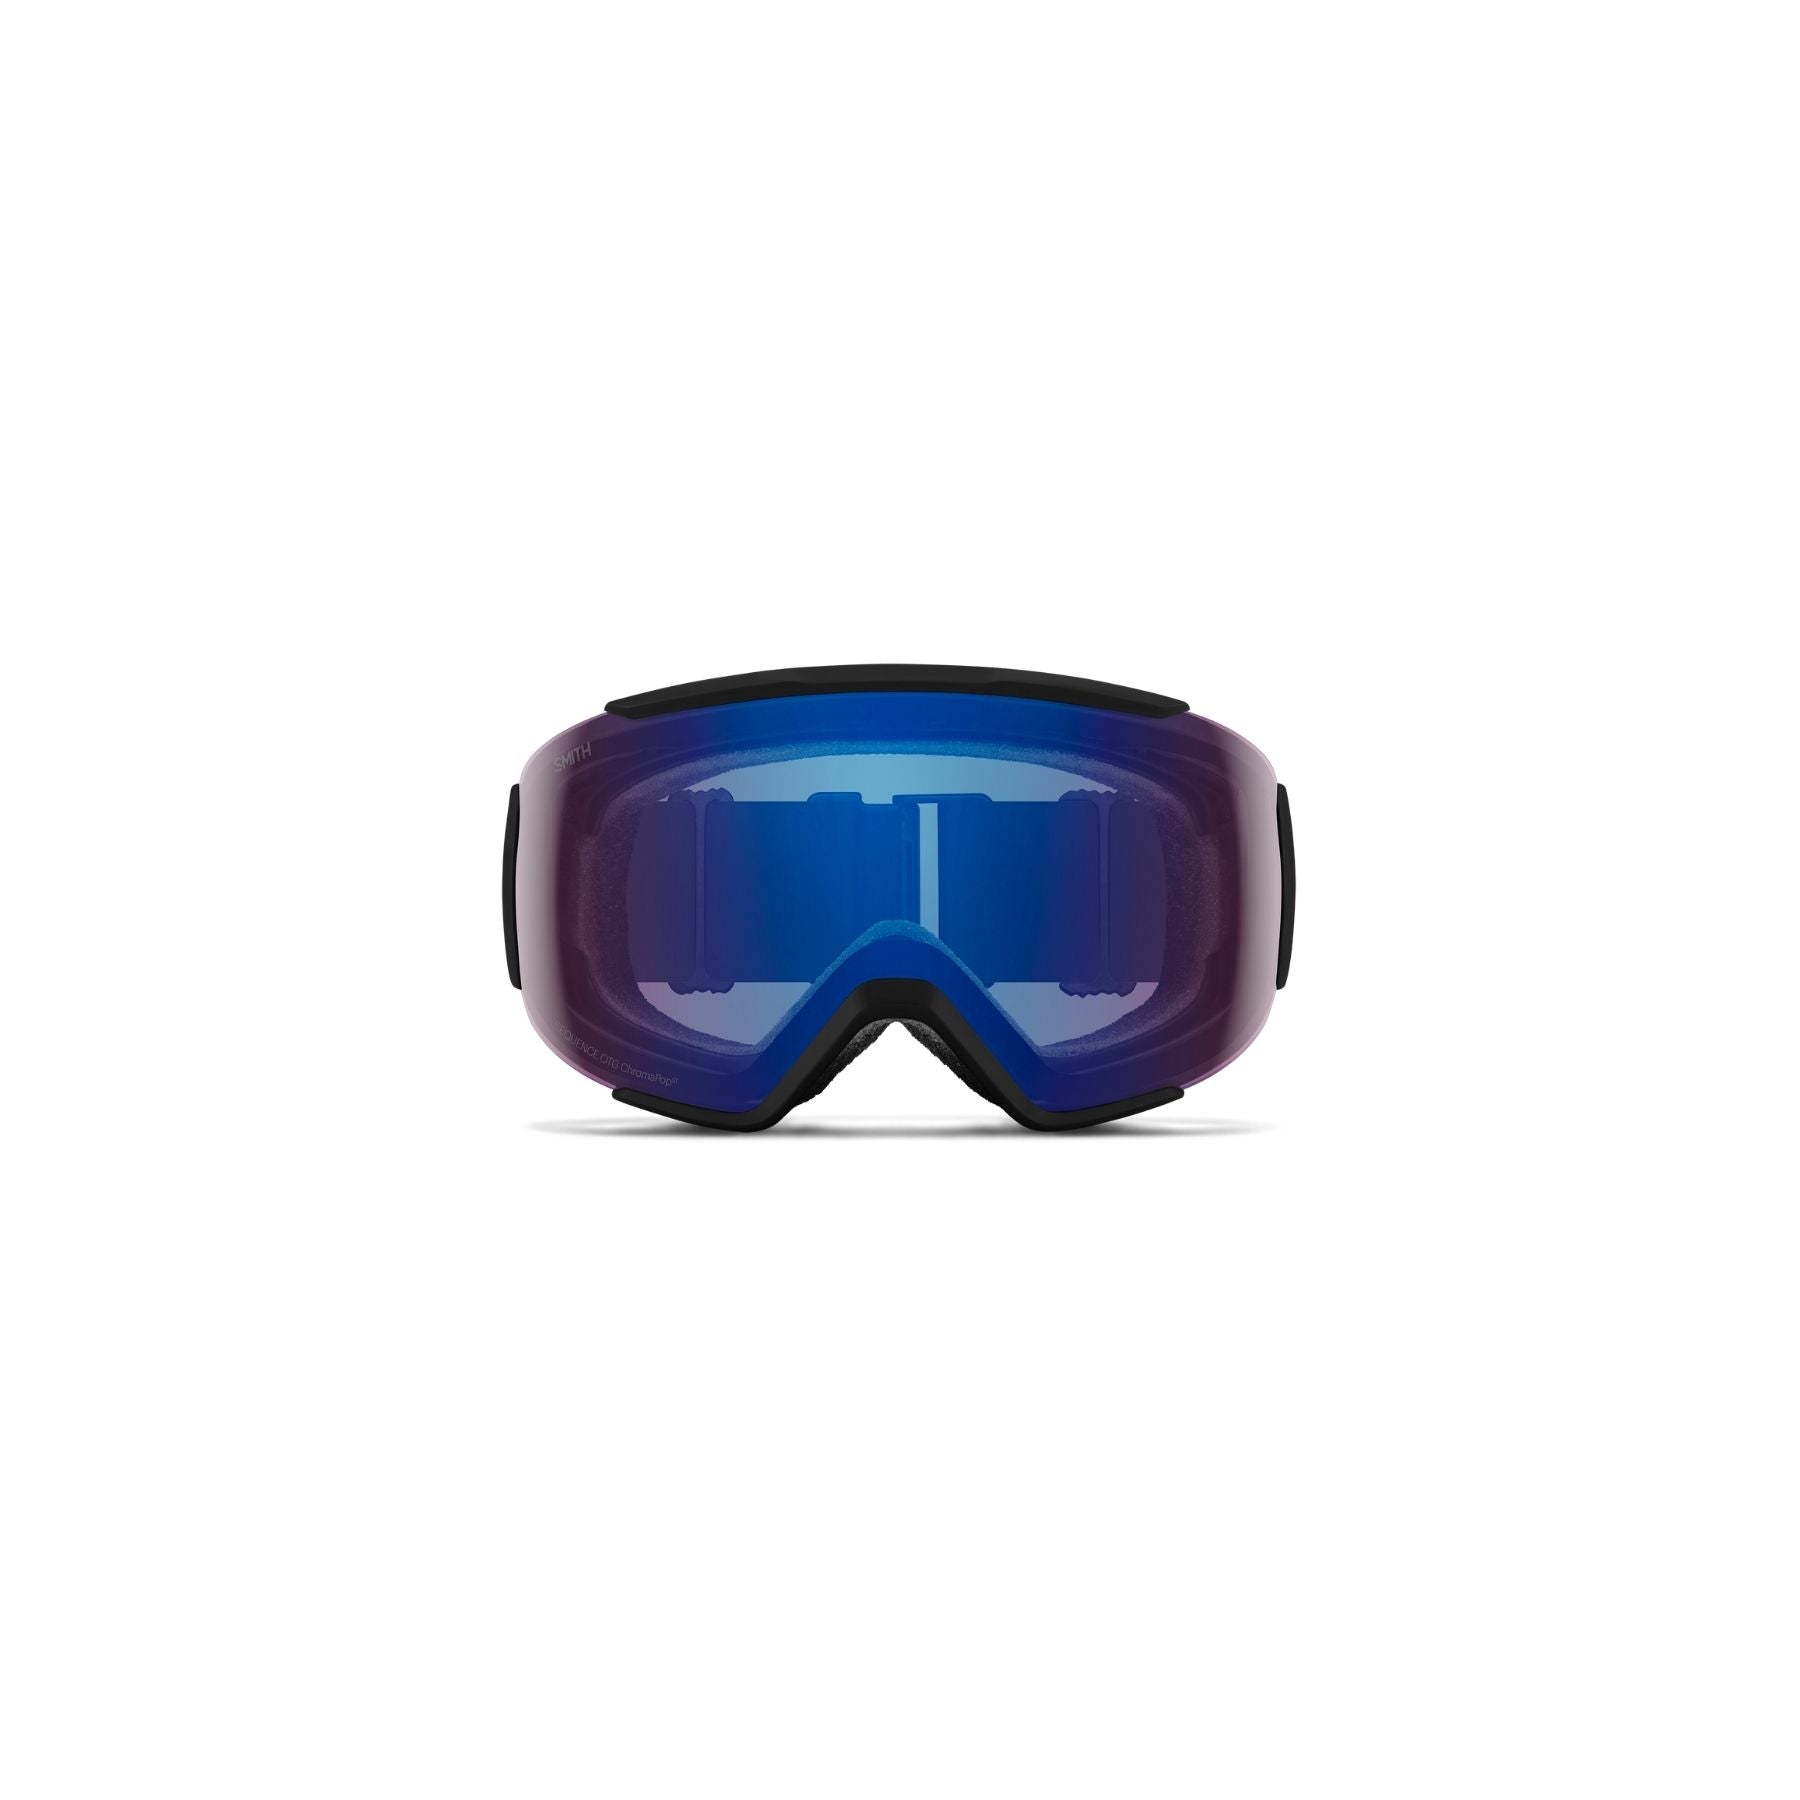 Smith Sequence OTG Goggle in Black